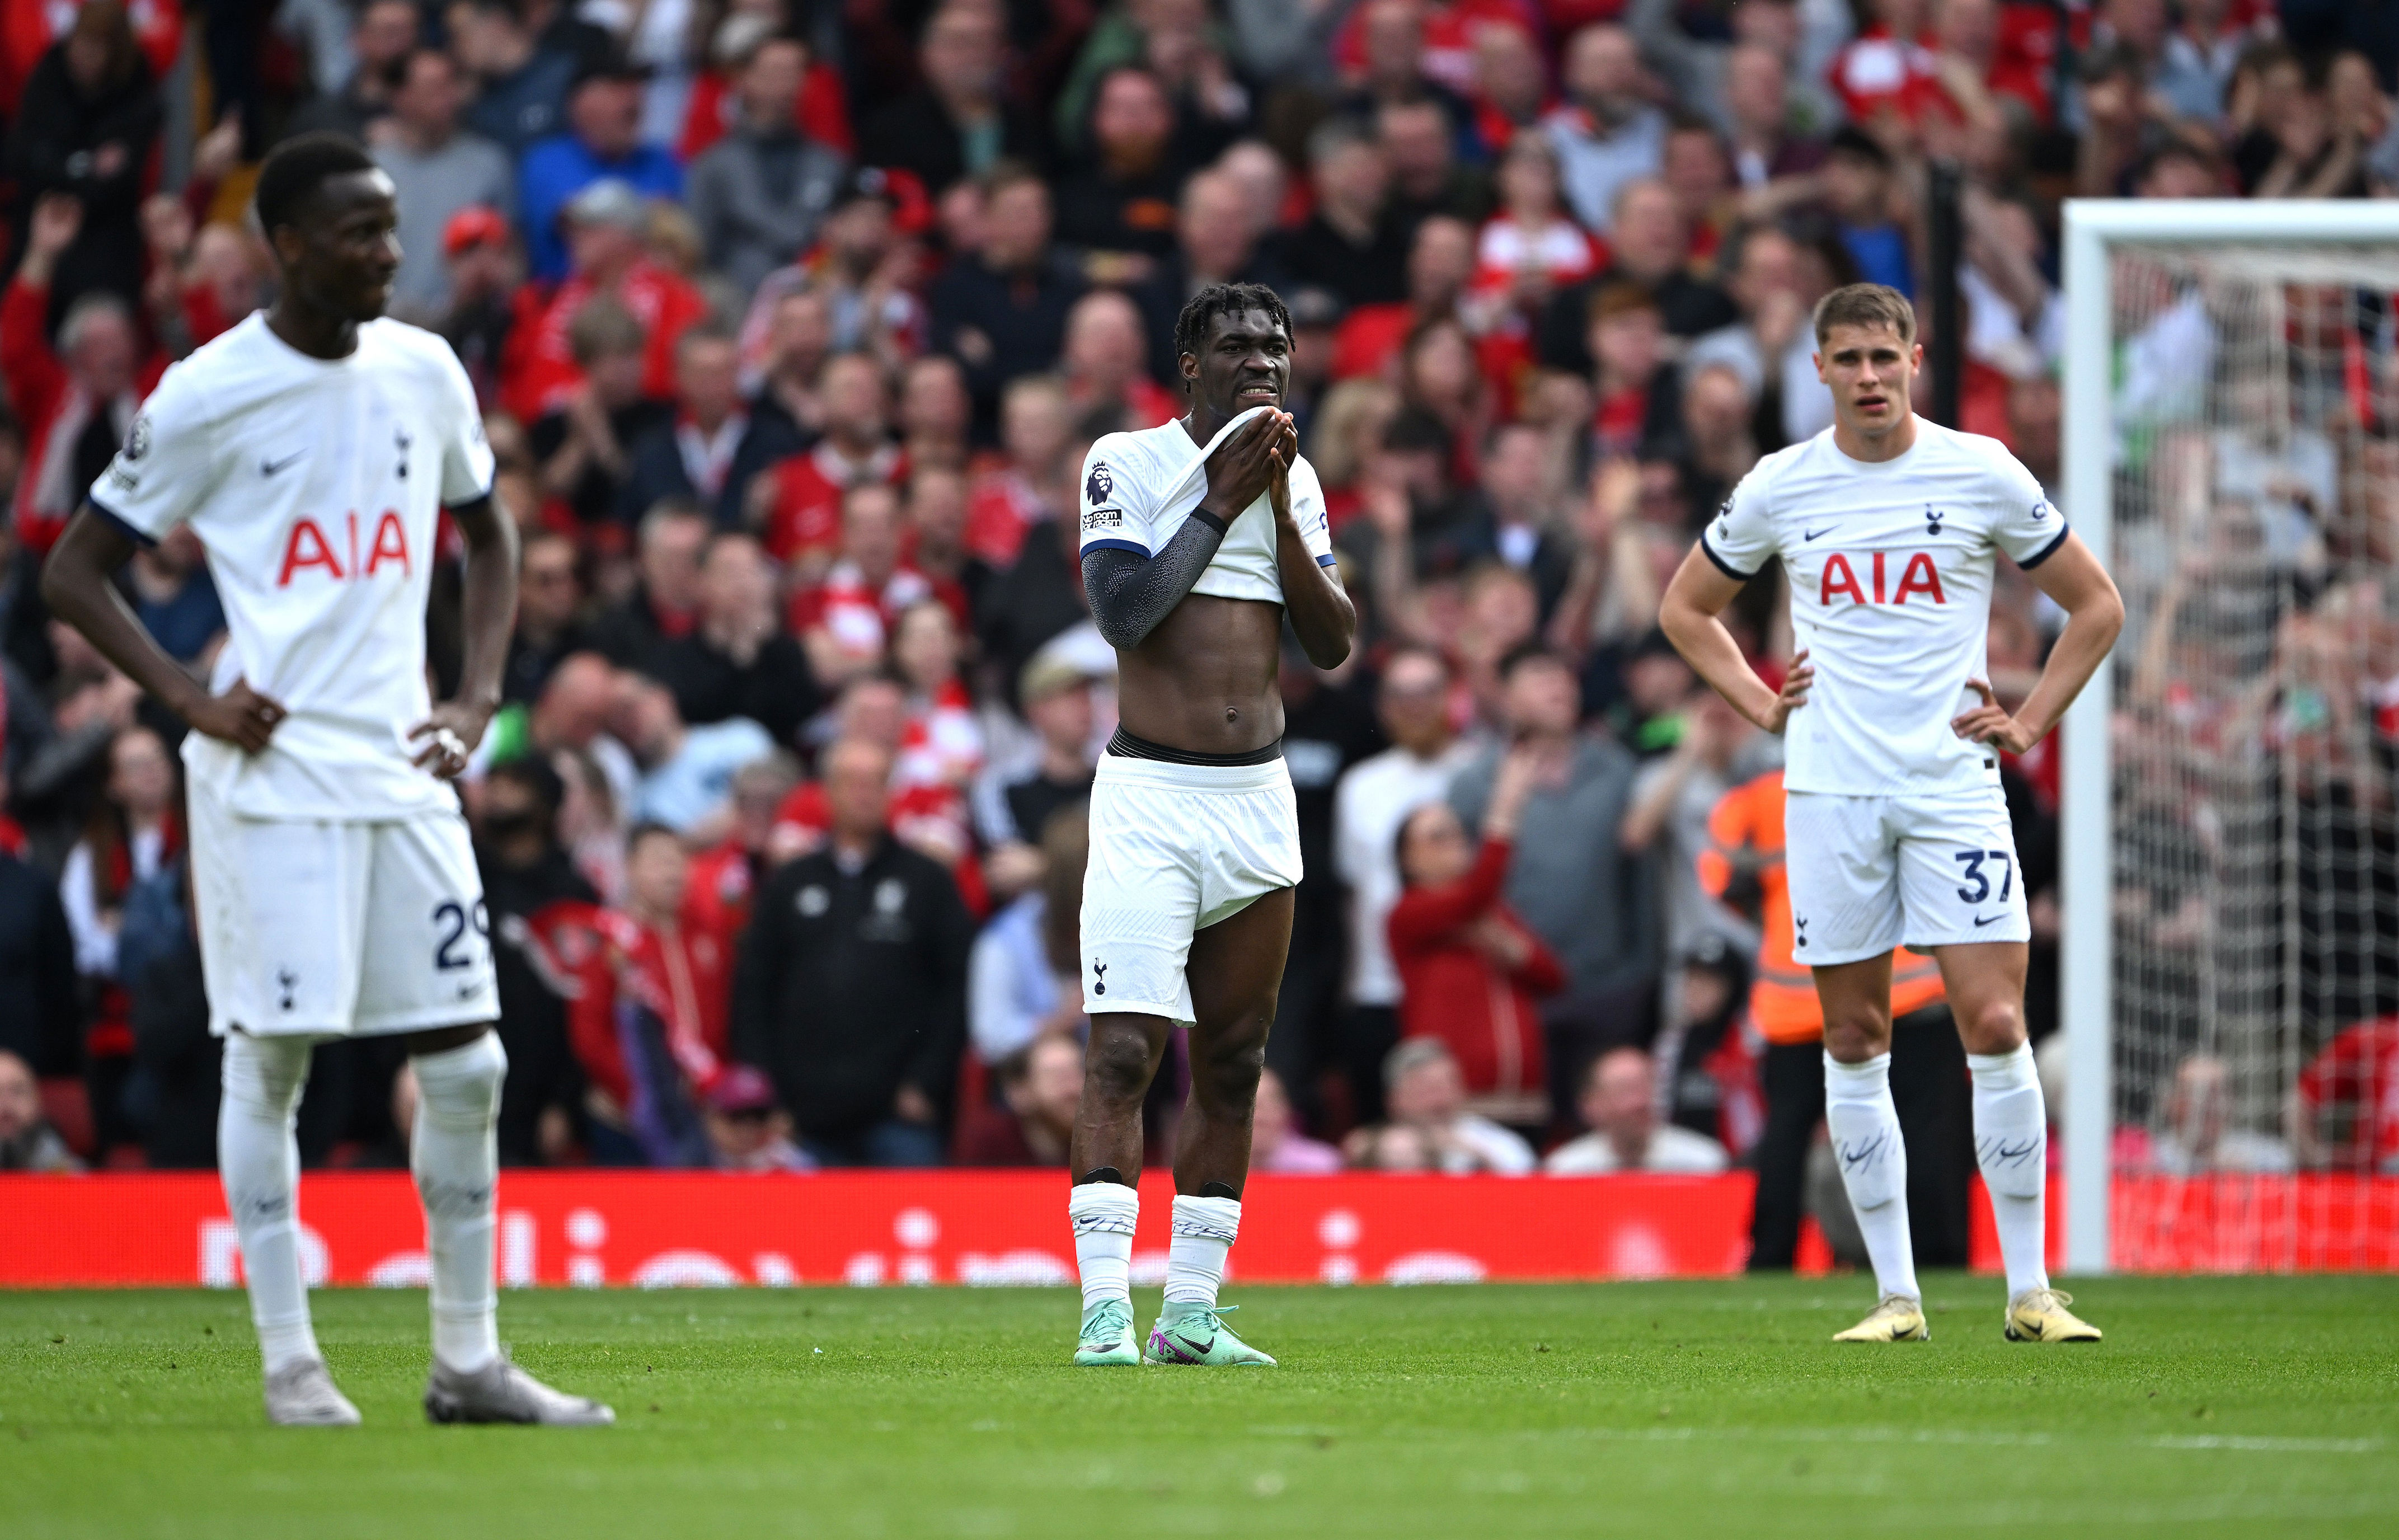 tottenham find a new way of being dismal – angeball is missing one obvious quality